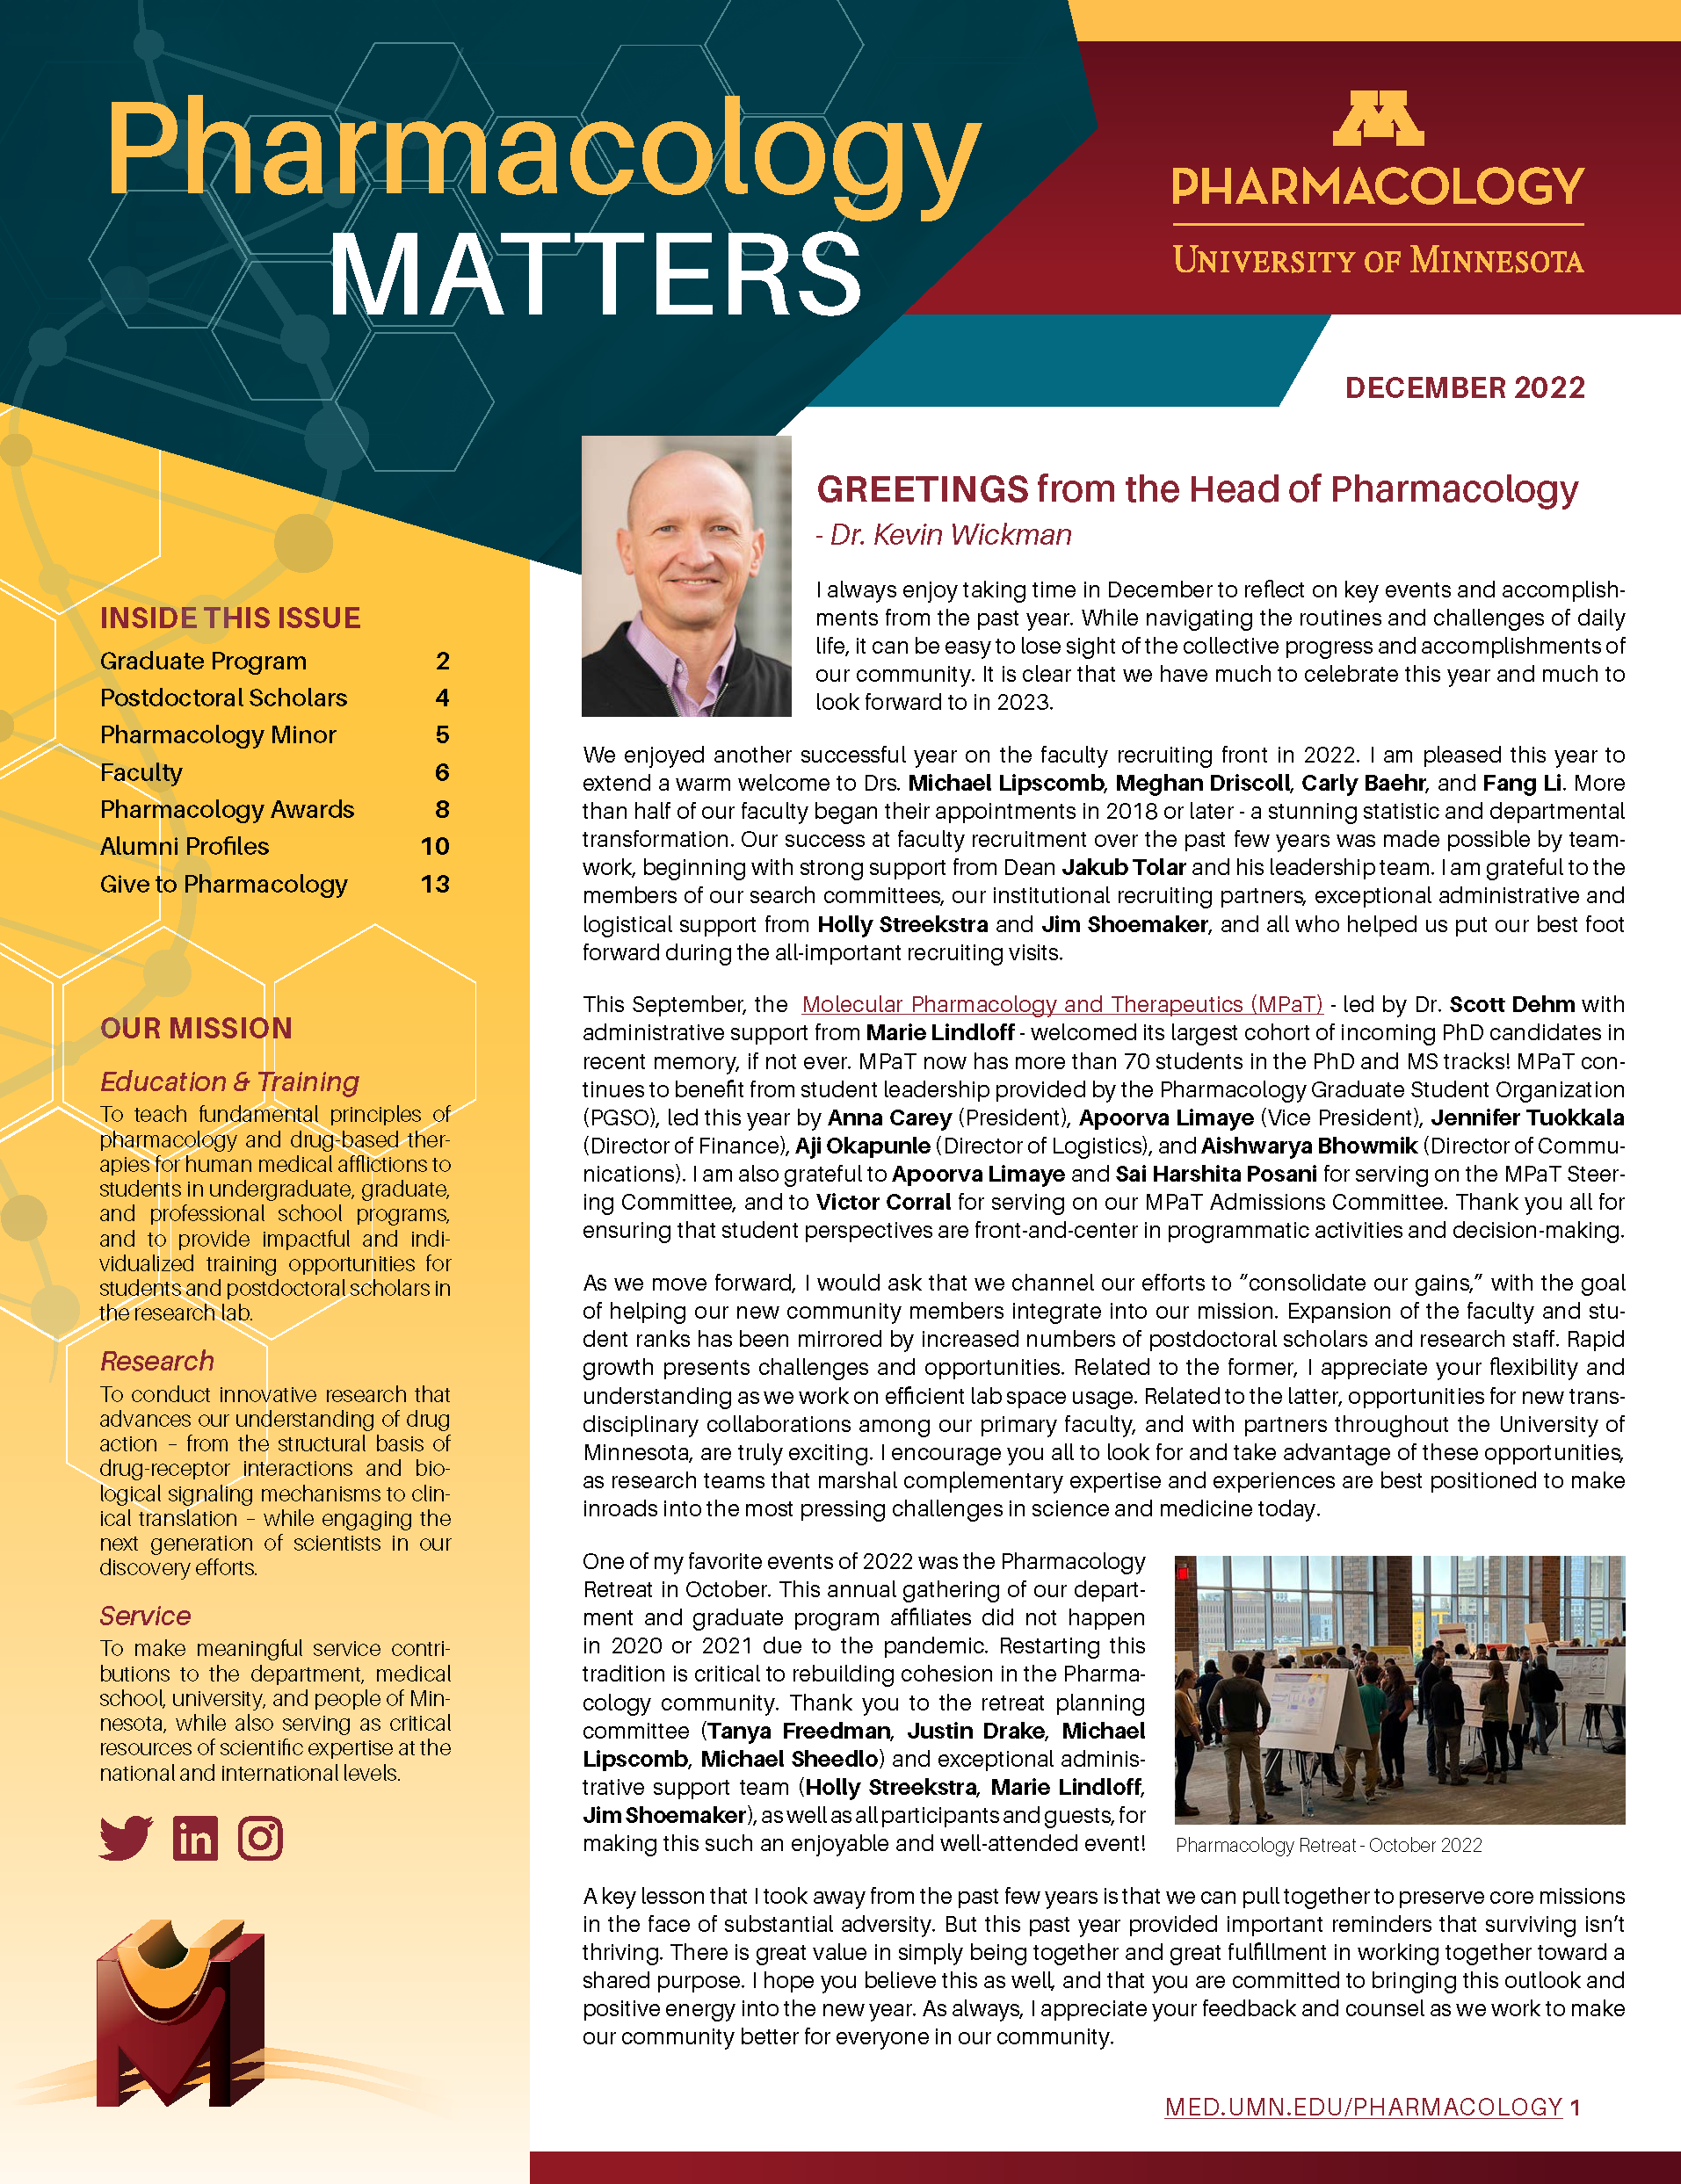 First page of Pharmacology Newsletter